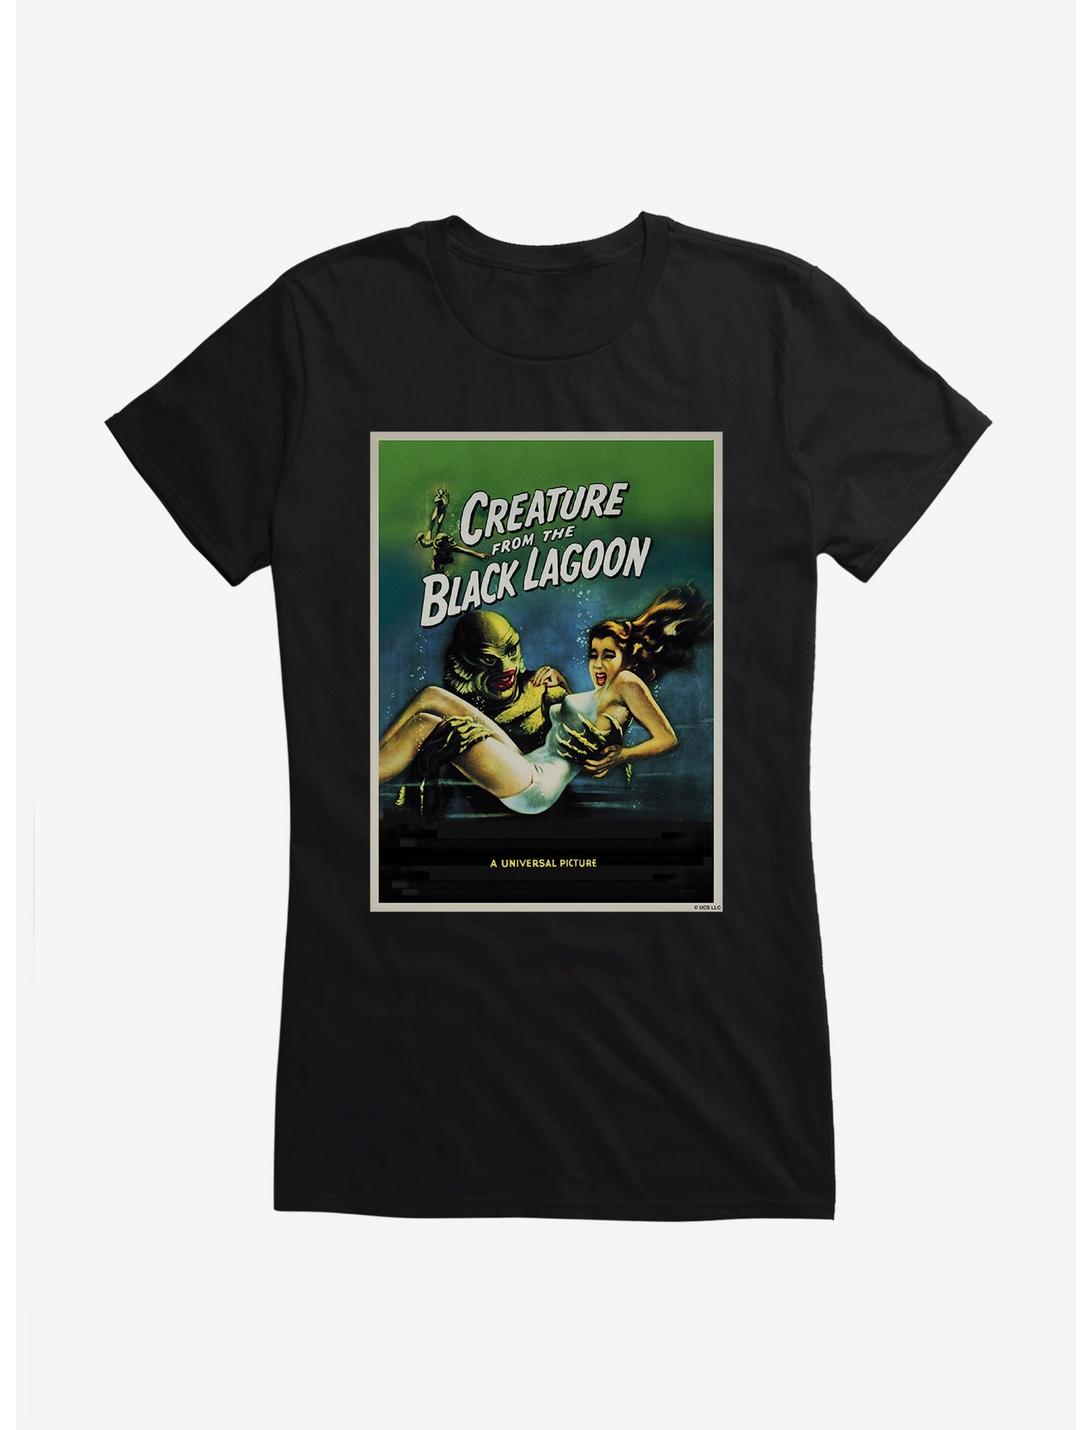 Creature From The Black Lagoon Universal Picture Poster Girls T-Shirt, BLACK, hi-res